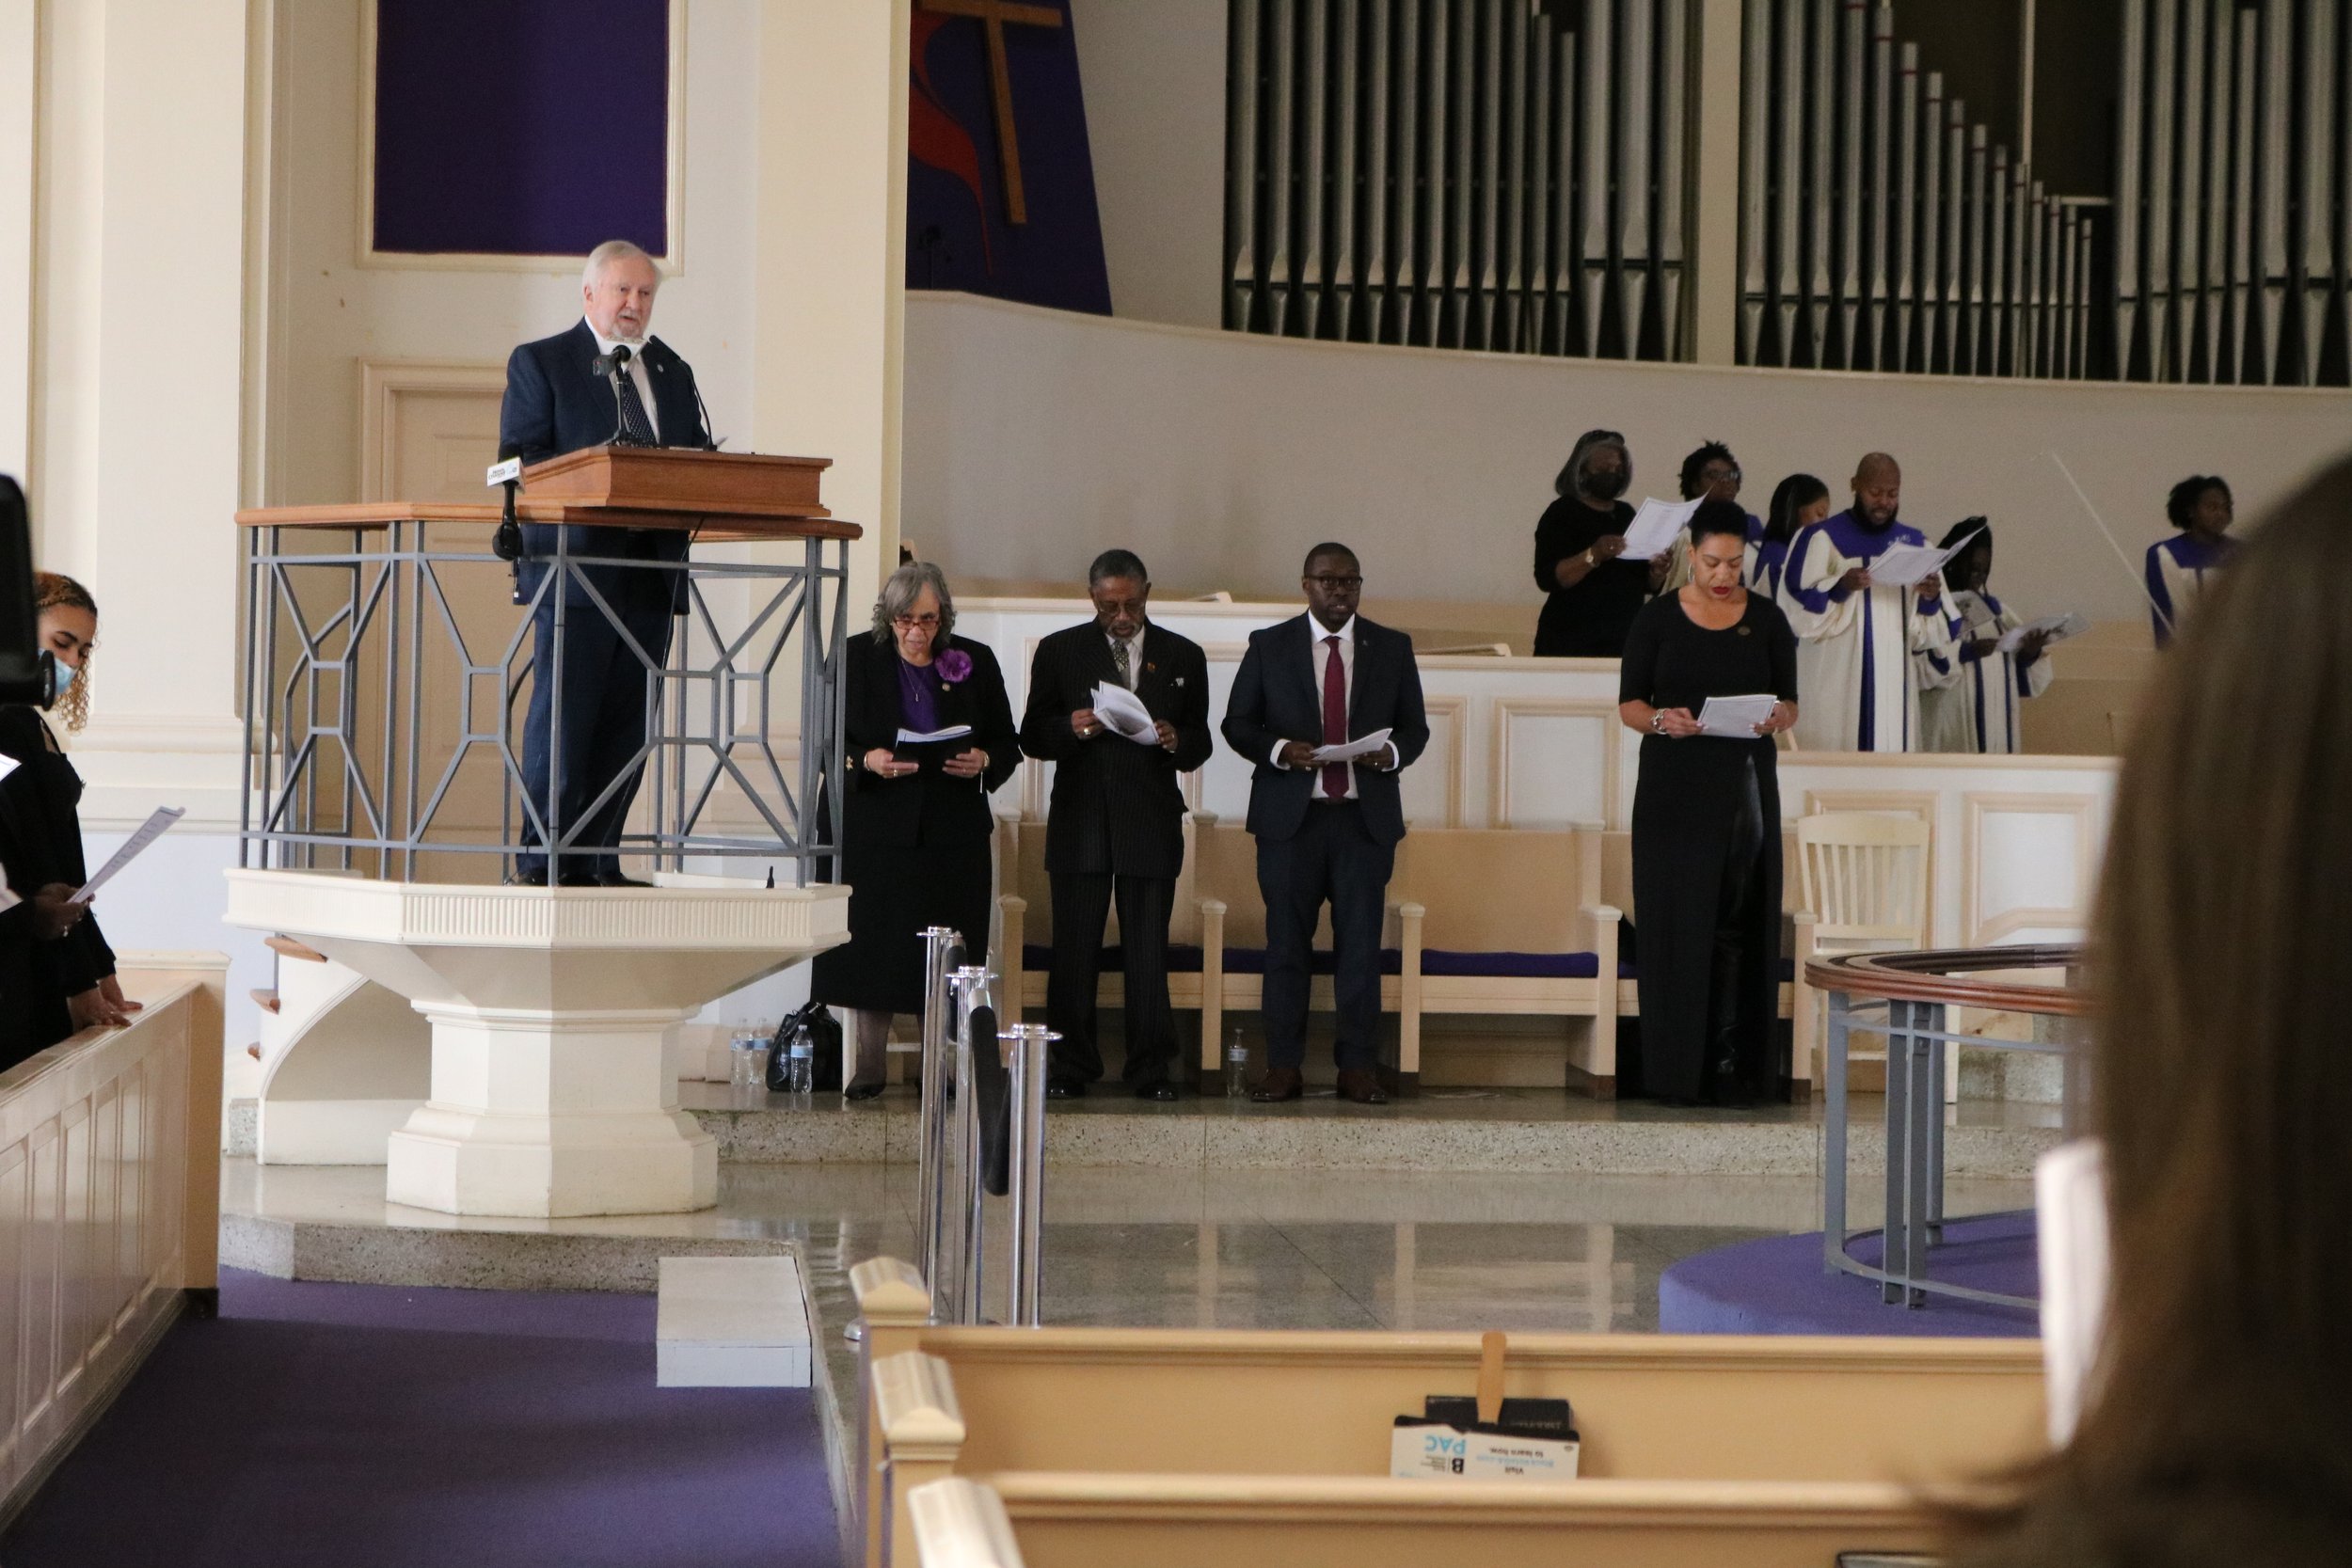  President Brooks Keel reads a passage from the program at the Tri-College Martin Luther King Jr. celebration on Jan. 13. 